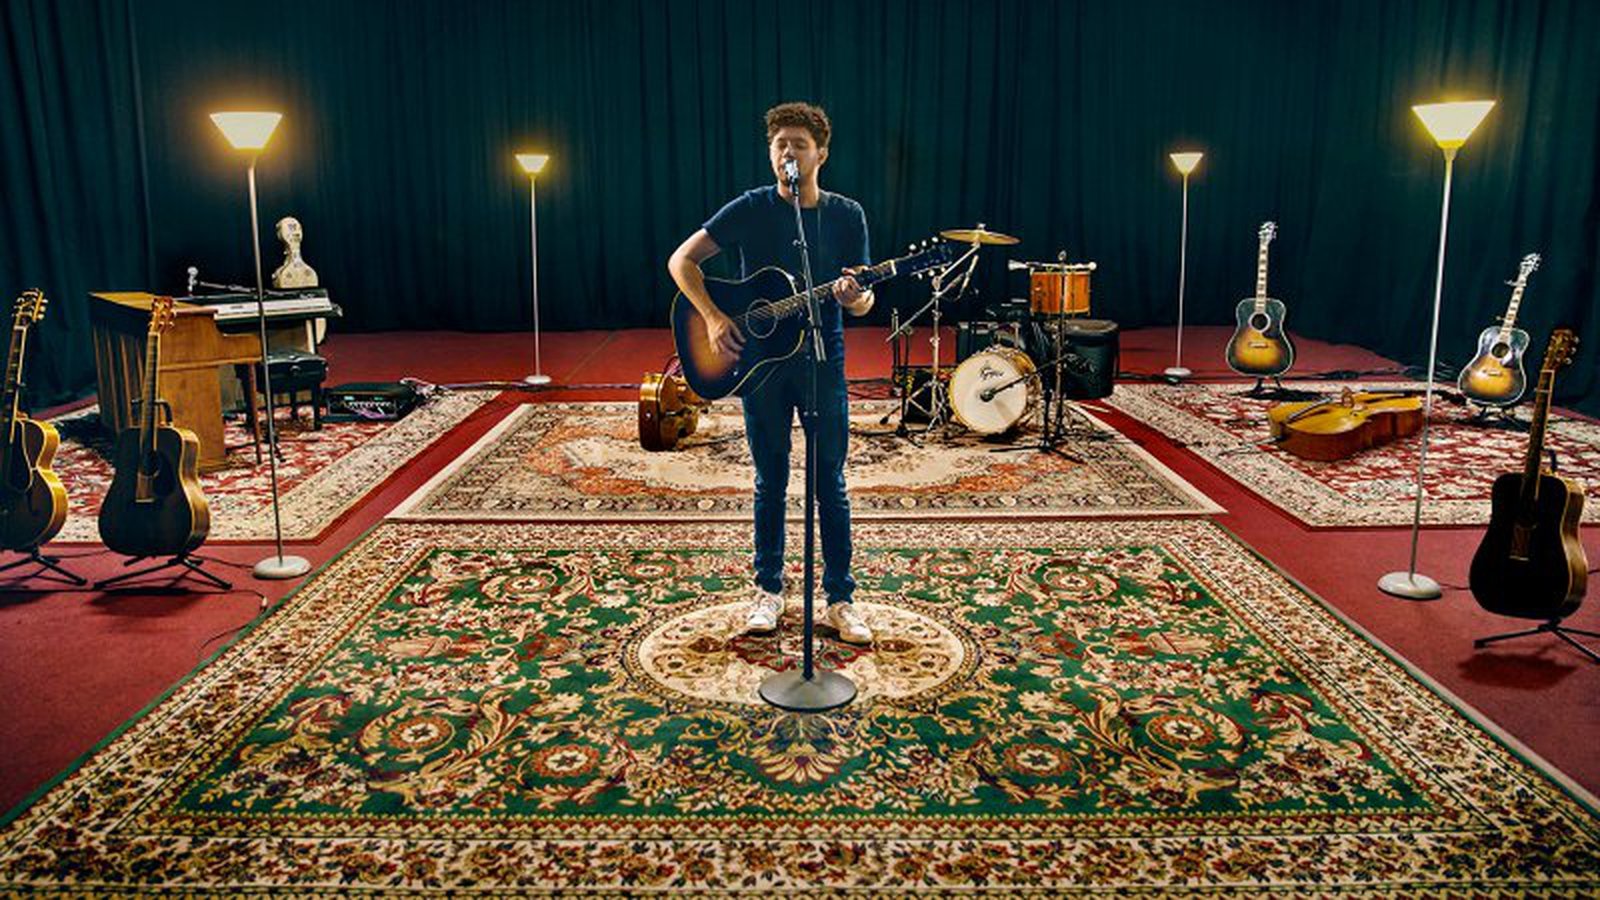 Niall Horan to bring Flicker Sessions tour to Dublin